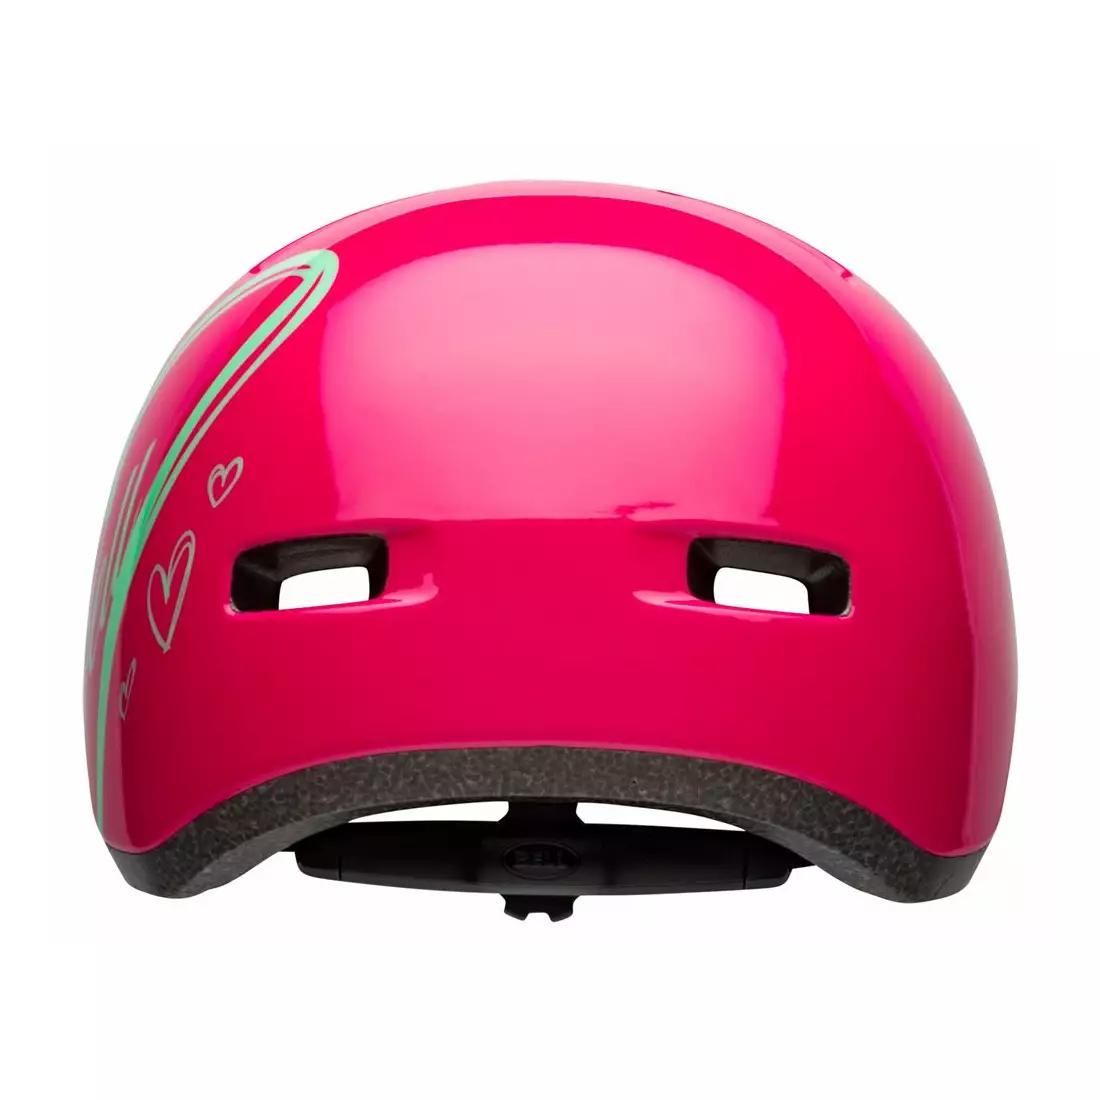 BELL LIL RIPPER kask rowerowy dziecięcy, pink adore